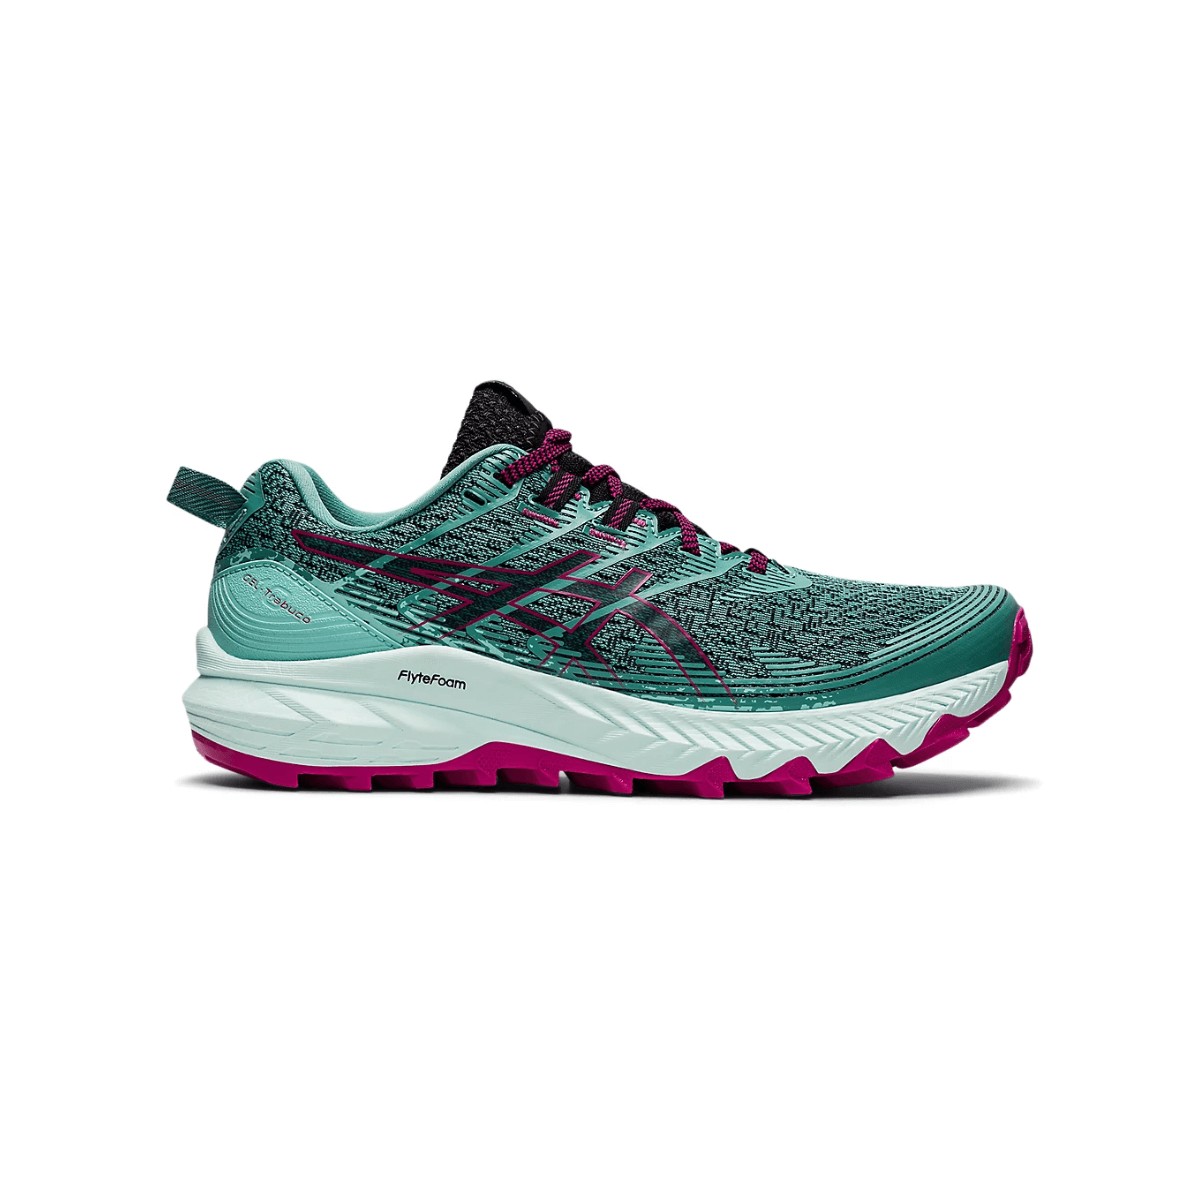 Asics Gel Trabuco 10 Turquoise Violet Women's Shoes AW22, Size 39,5 - EUR